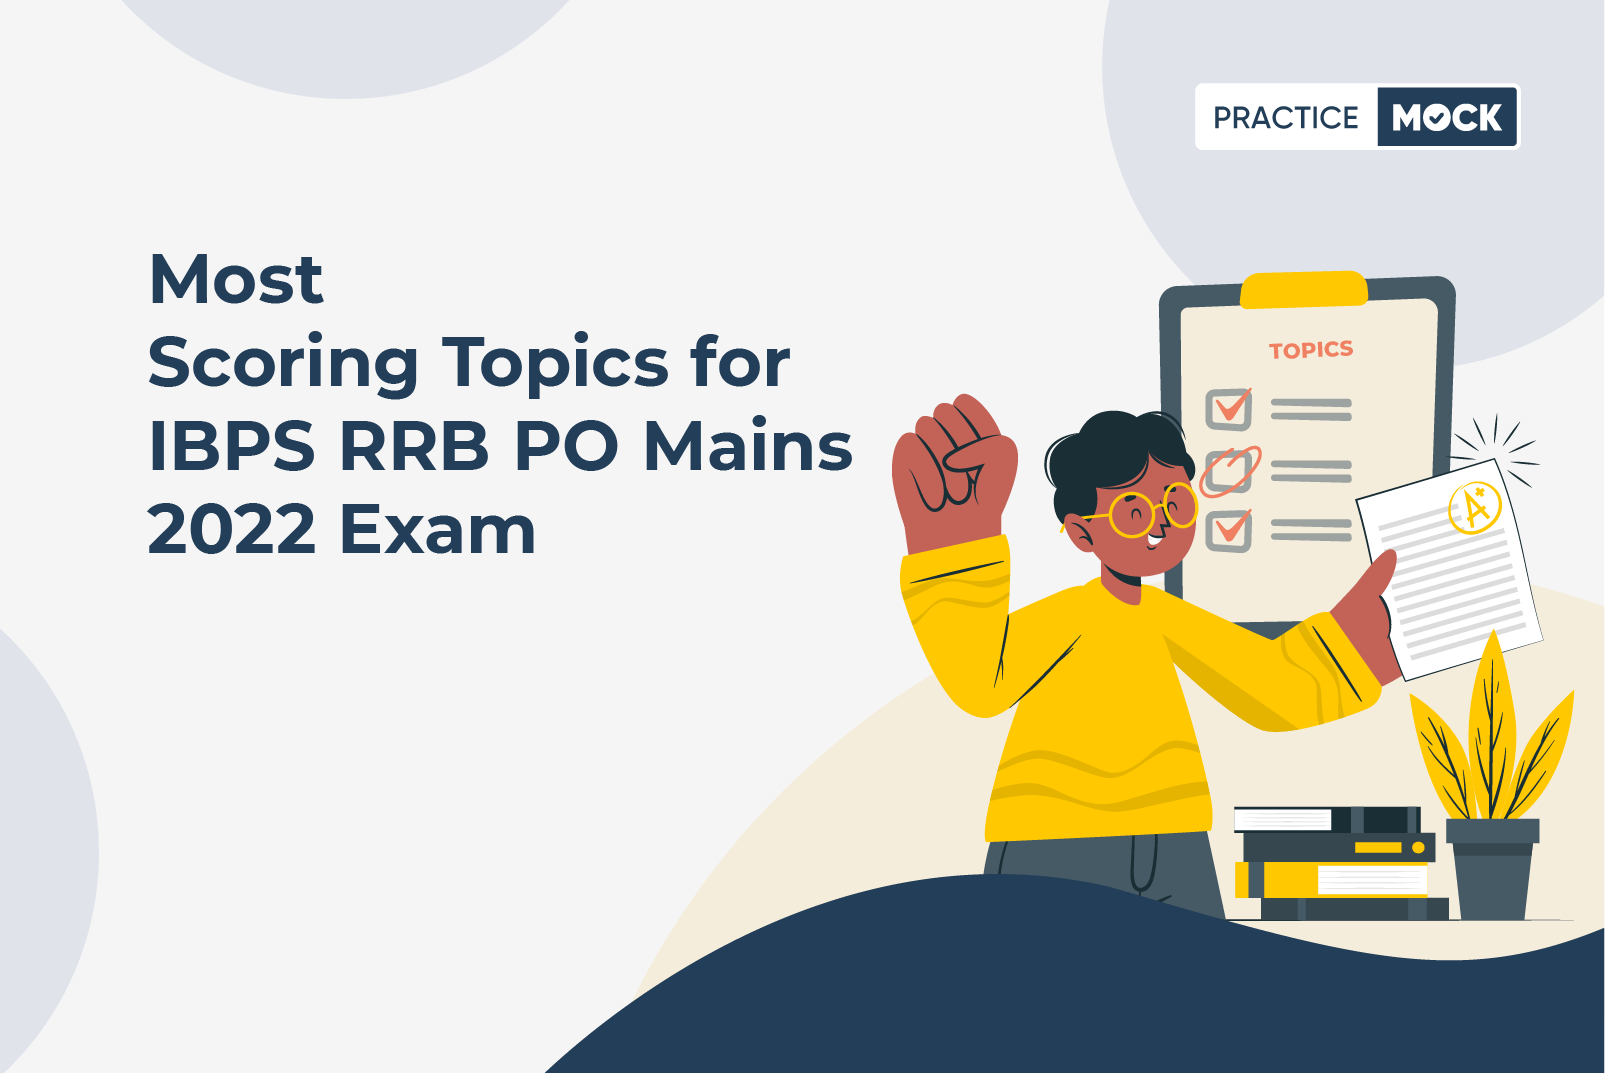 Important Topics for IBPS RRB PO Mains 2022 Exam